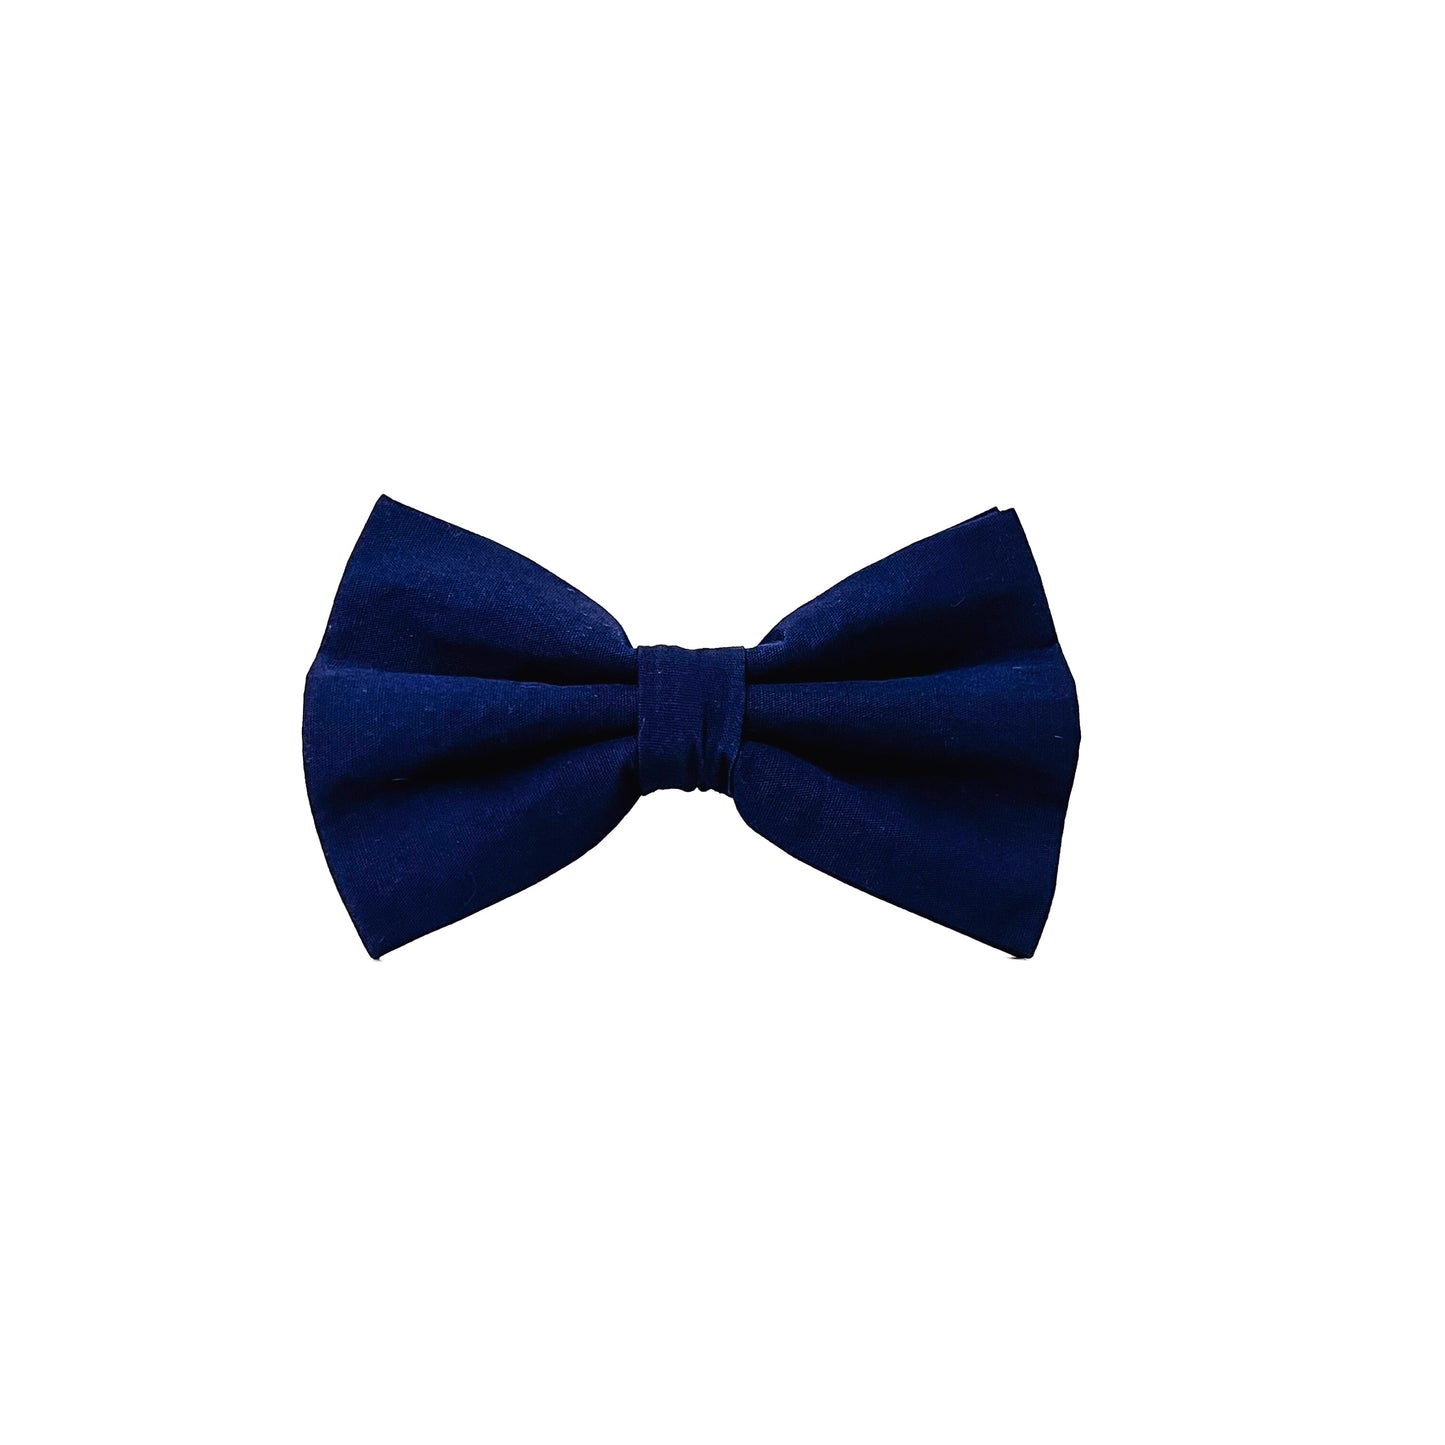 Cotton Bow Tie - Truly Navy